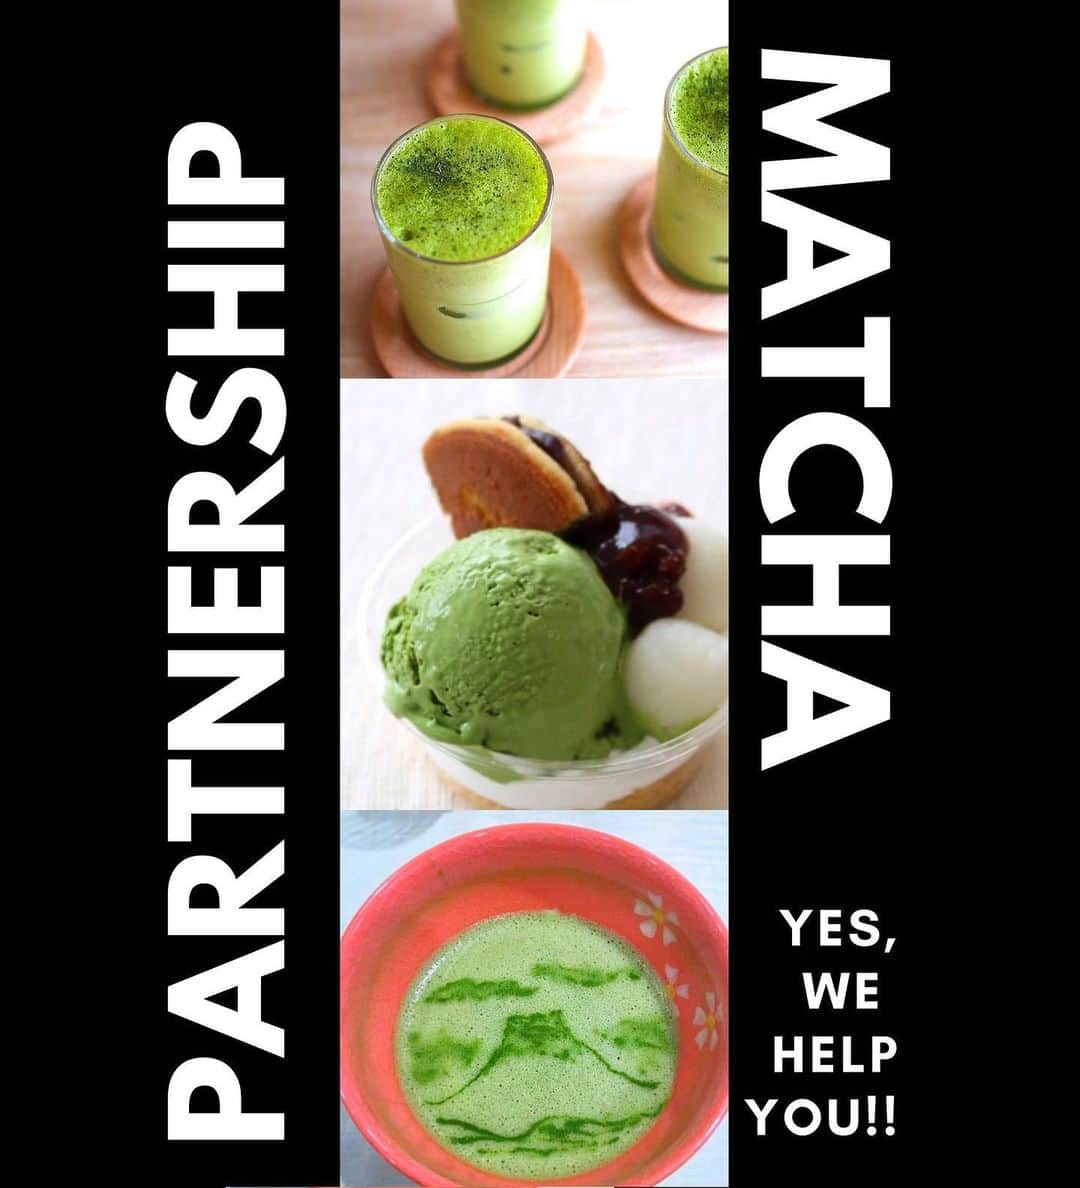 Wabi•Sabiのインスタグラム：「100% Kyoto Quality Matcha is ready for your cafe/shop/restaurant/bar. DM for the quote! . Providing high quality Kyoto Matcha at a reasonable price.  DM if you want a wholesales quote. We'd love to help you with your Matcha business. Online prices below: Matcha Latte Powder $25.00 (600g) Matcha kitchen grade $62.00 (200g) . Who loves Matcha? Kyoto Matcha brings you future customers! . . 🍃More about our Matcha and us wabisabitea-kyoto.com/ . . #hotel #hotelbar #hotelrestaurant」